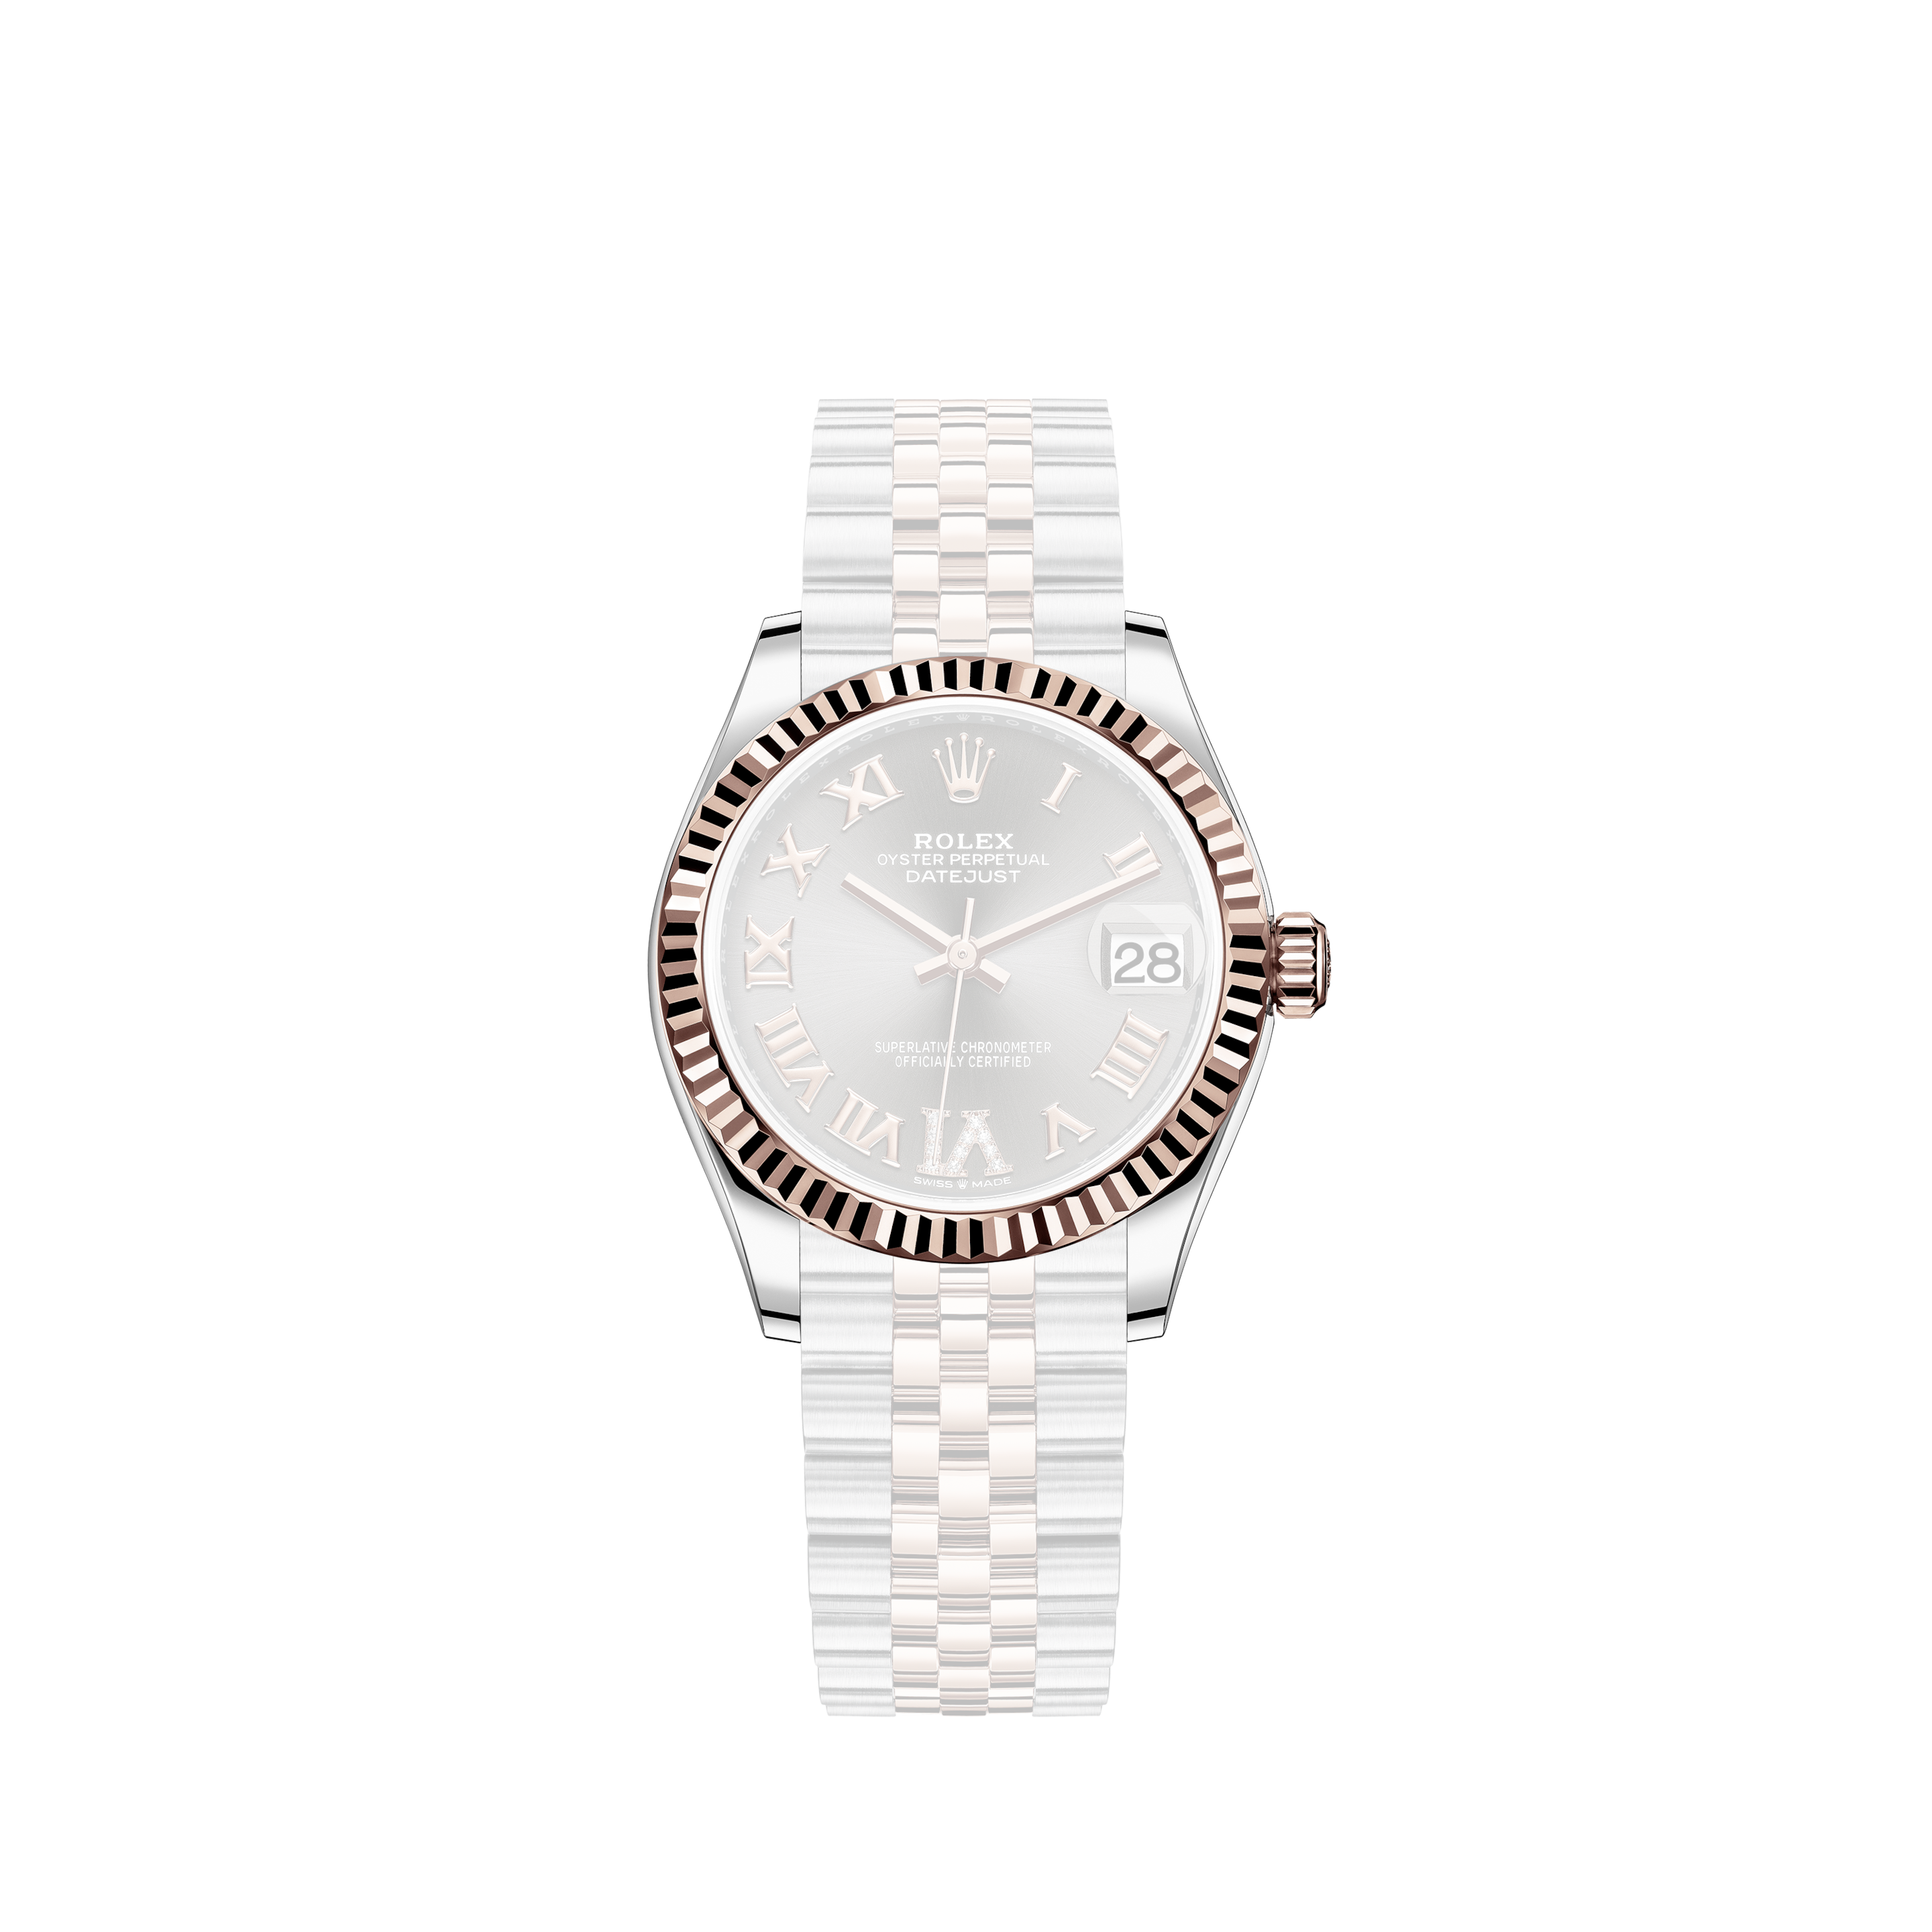 Rolex Datejust Turn-O-Graph Bronze Index Dial Index Dial 1625 36mm WatchRolex Datejust Turn-O-Graph Custom Diamond Two Tone Stainless Steel and Rose Gold Watch 116261